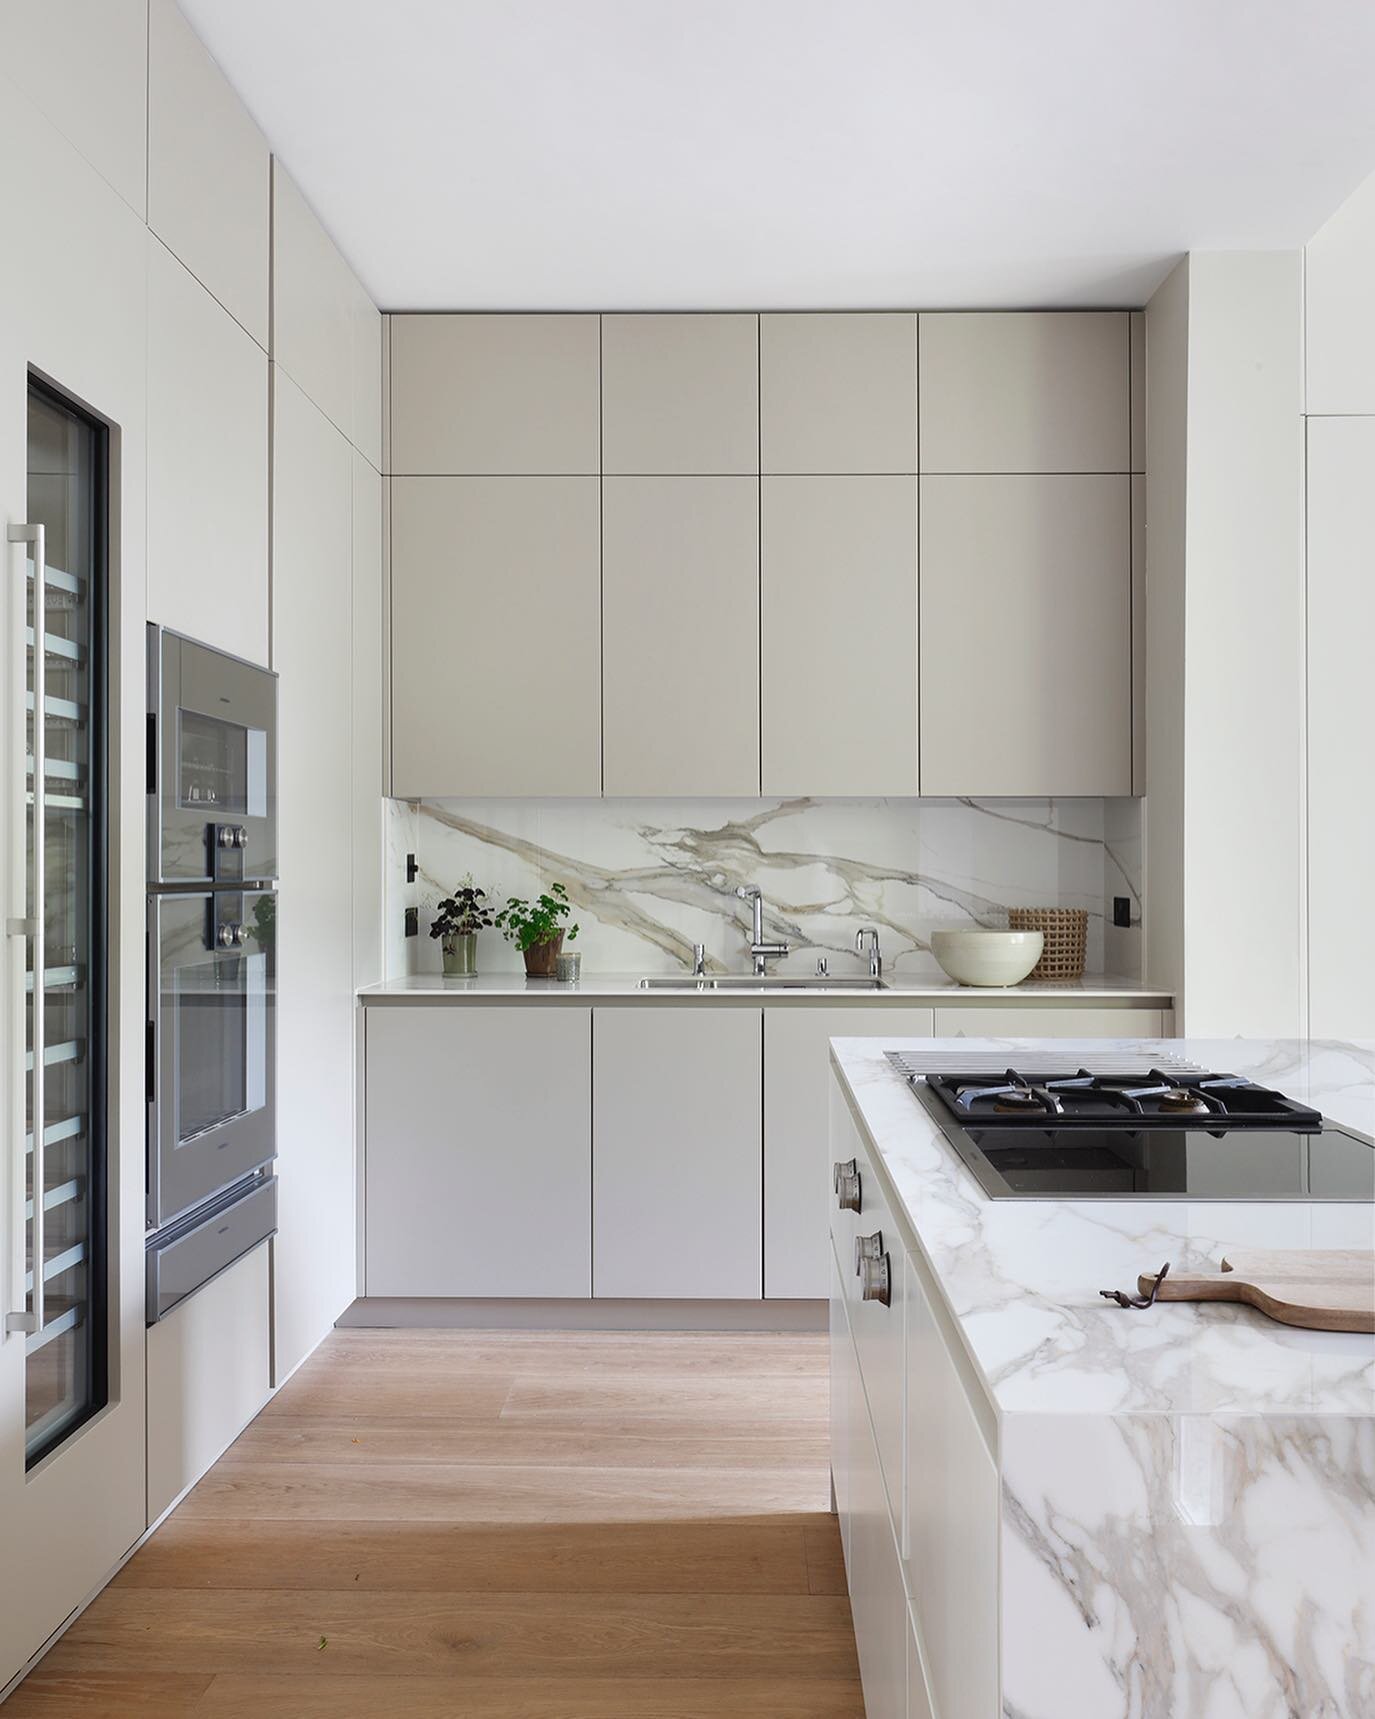 A heavily veined worktop adds interest to this contemporary kitchen, whilst the natural oak flooring adds warmth and texture. 

Photography @alexanderjamesphoto 
Construction @lawrencewebbltd 
Interior Design @sarah_brink01 
Appliances @gaggenauoffic